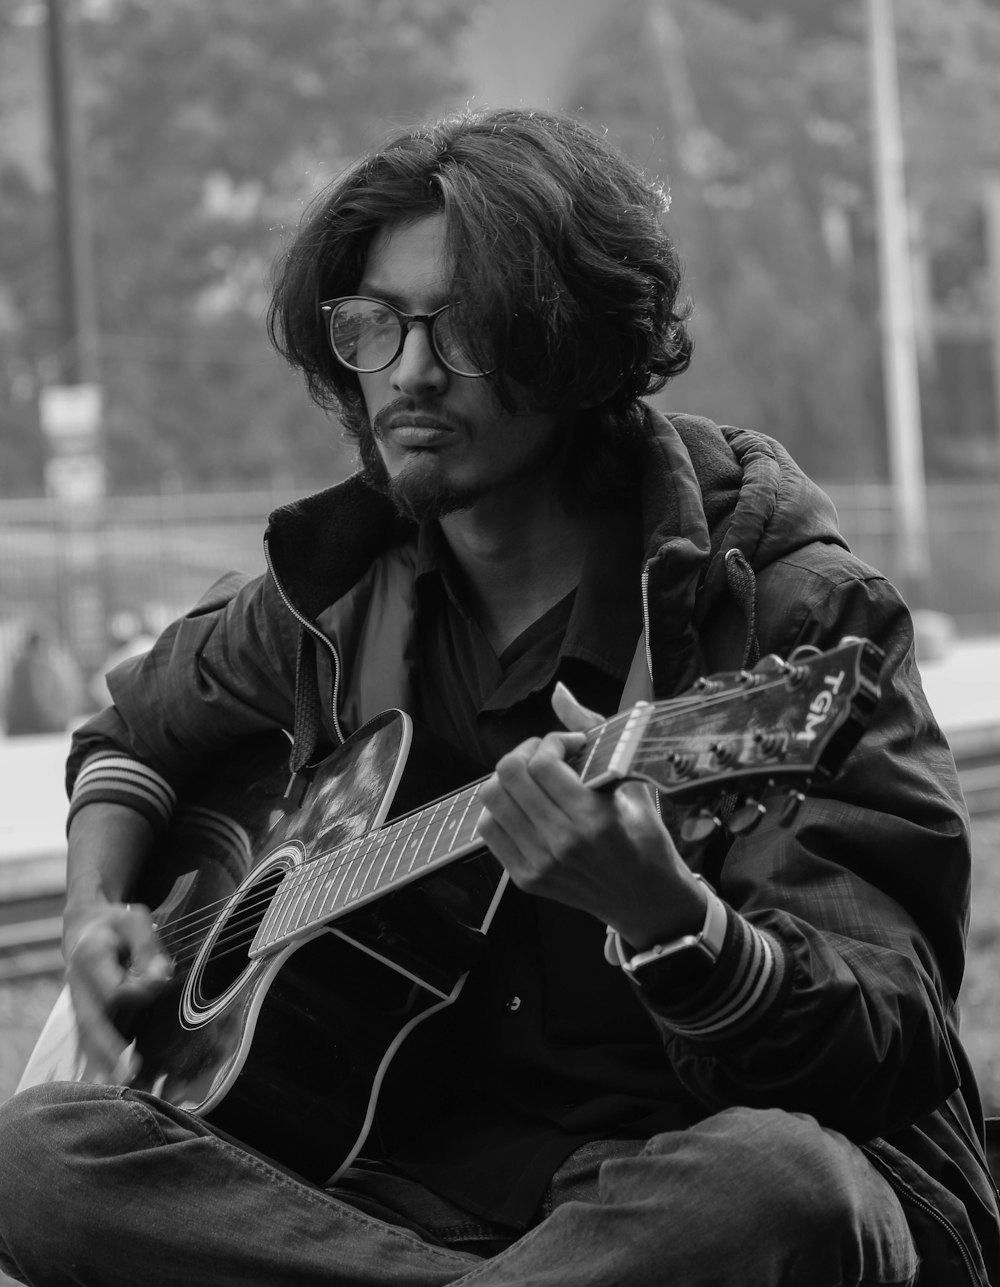 man playing acoustic guitar in grayscale